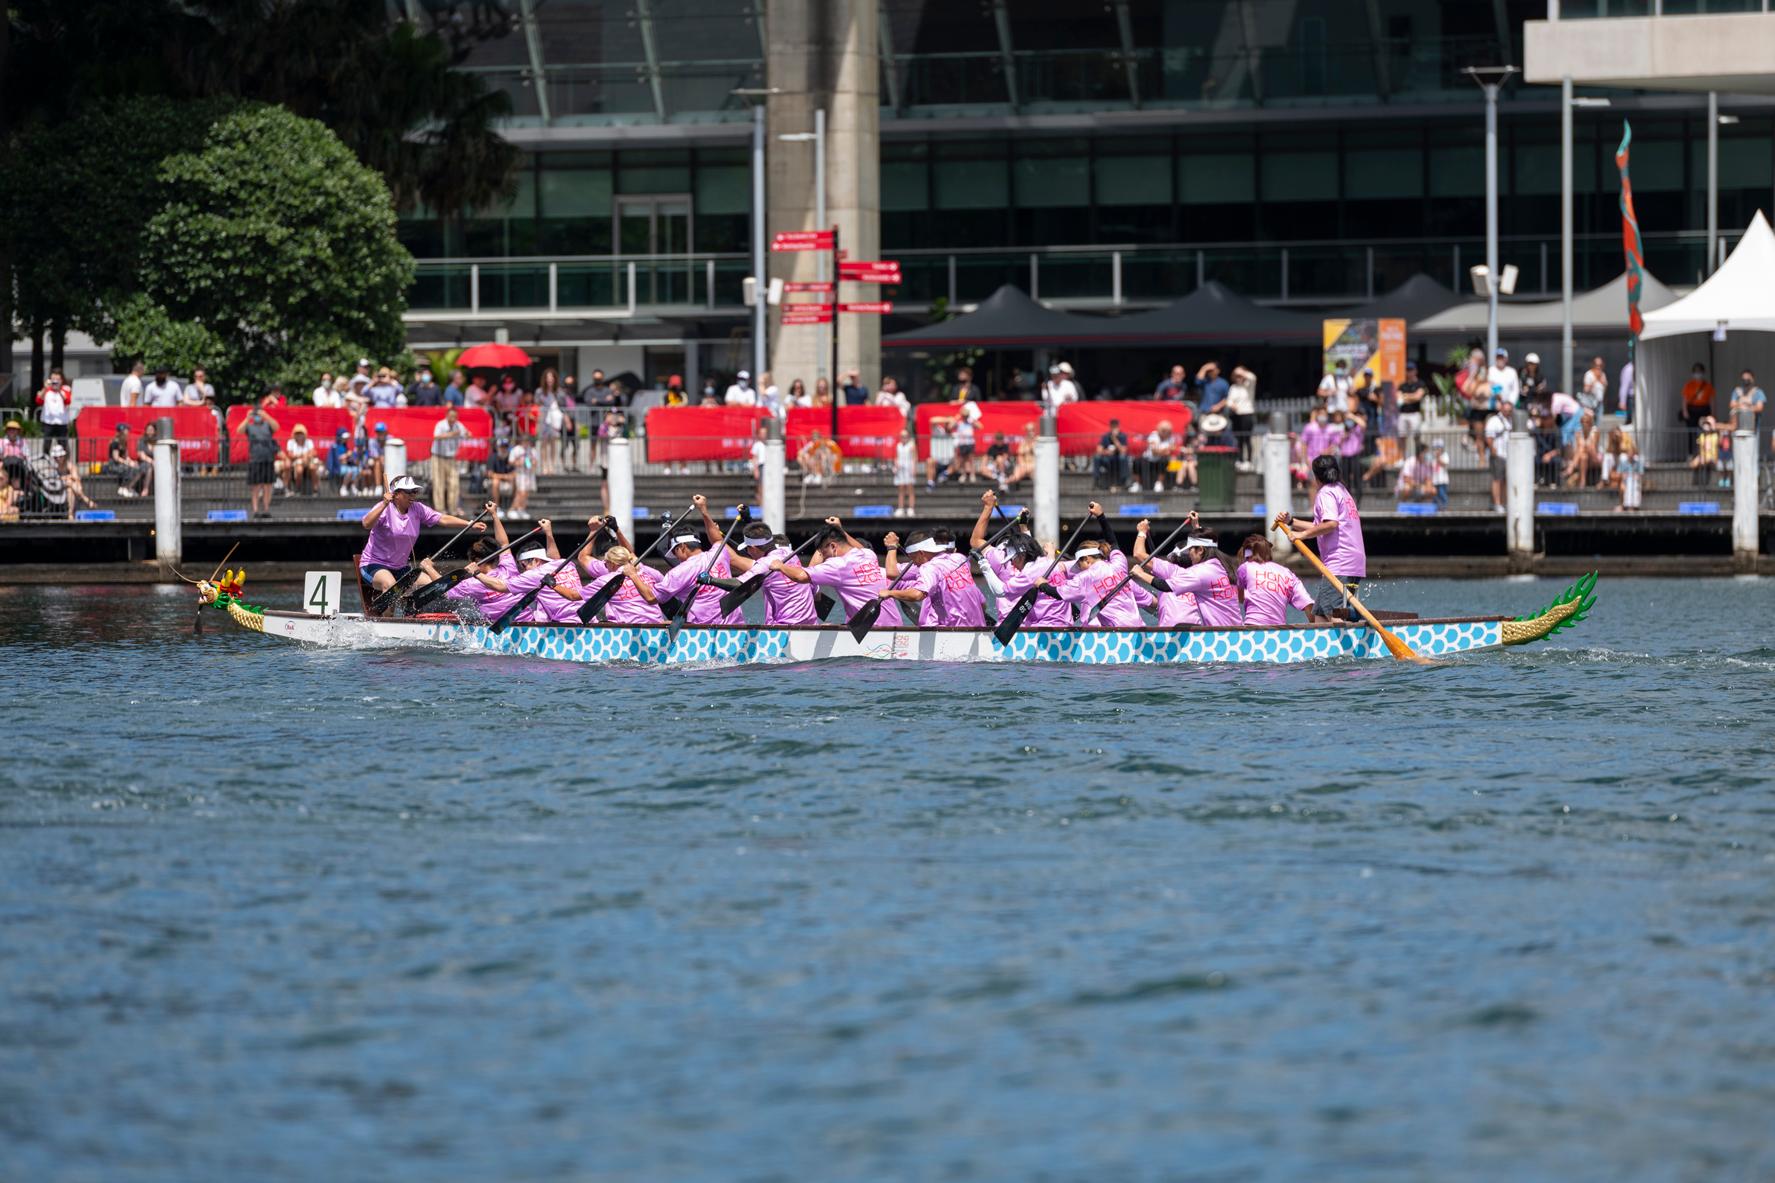 The Hong Kong Economic and Trade Office, Sydney (HKETO) participated in the Sydney Lunar Festival Dragon Boat Races in Darling Harbour in Sydney, Australia on February 5 and 6. The Hong Kong Team organised by the HKETO participated in the Social Category races on February 6.